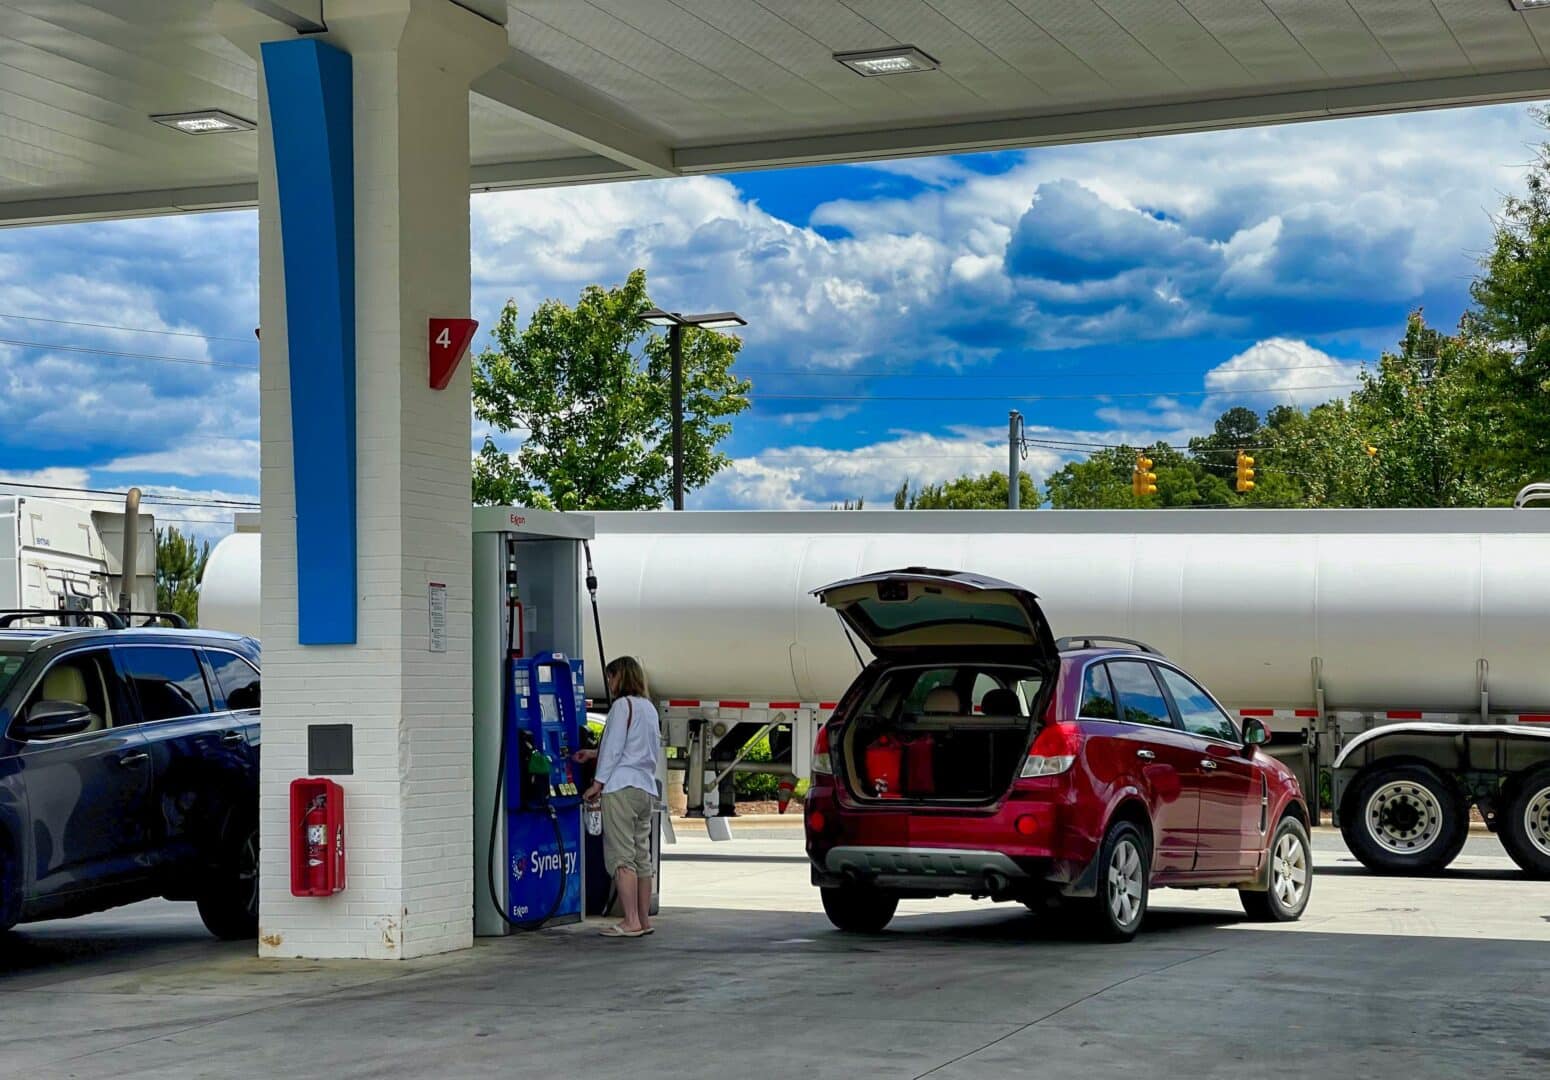 Woman pumps gas while an oil truck brings gas to refill tanks at a gas station.